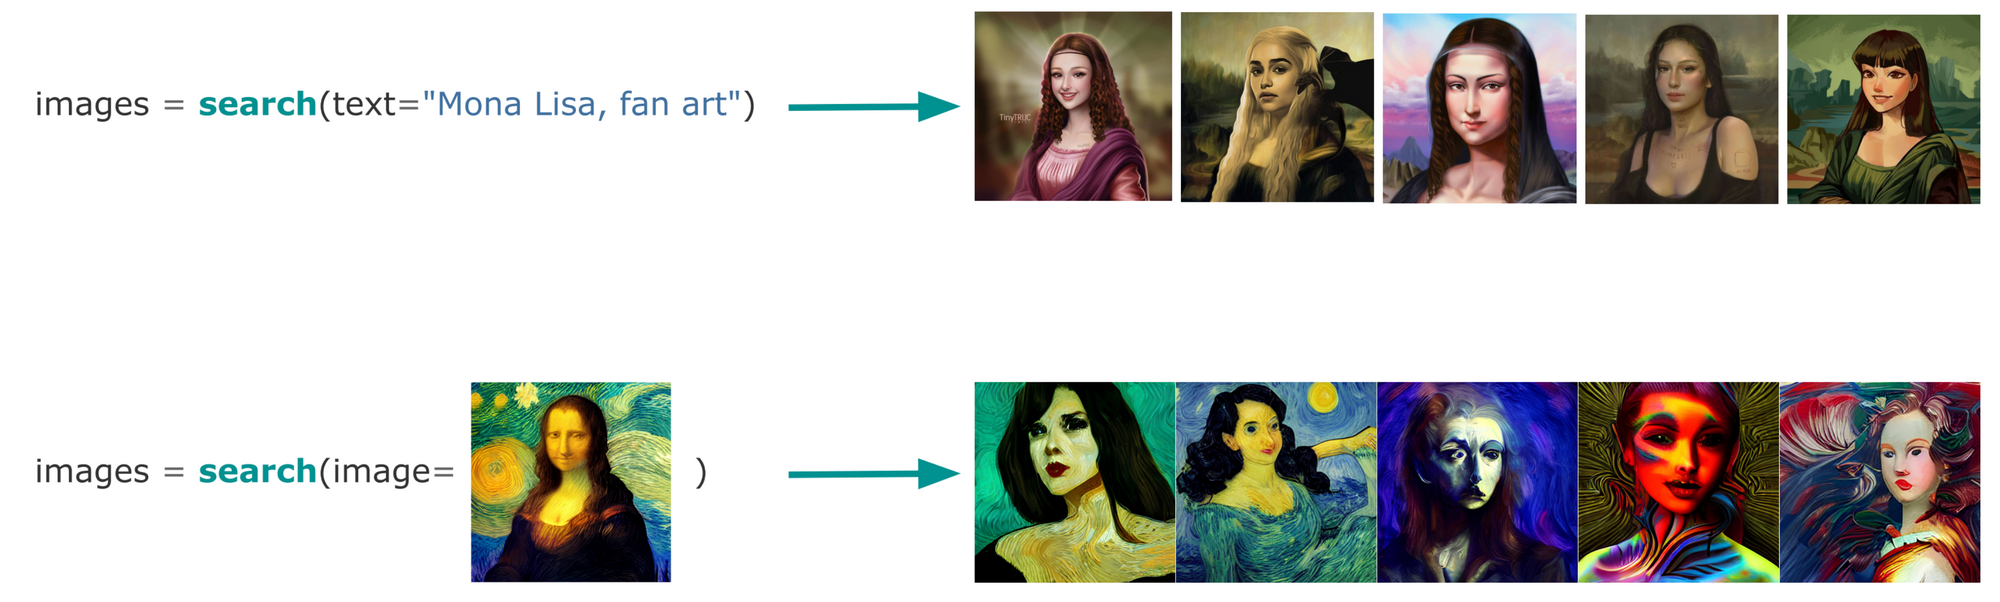 Diagram showing a text and image-based search for "Mona Lisa, fan art", resulting in diverse Mona Lisa interpretations.